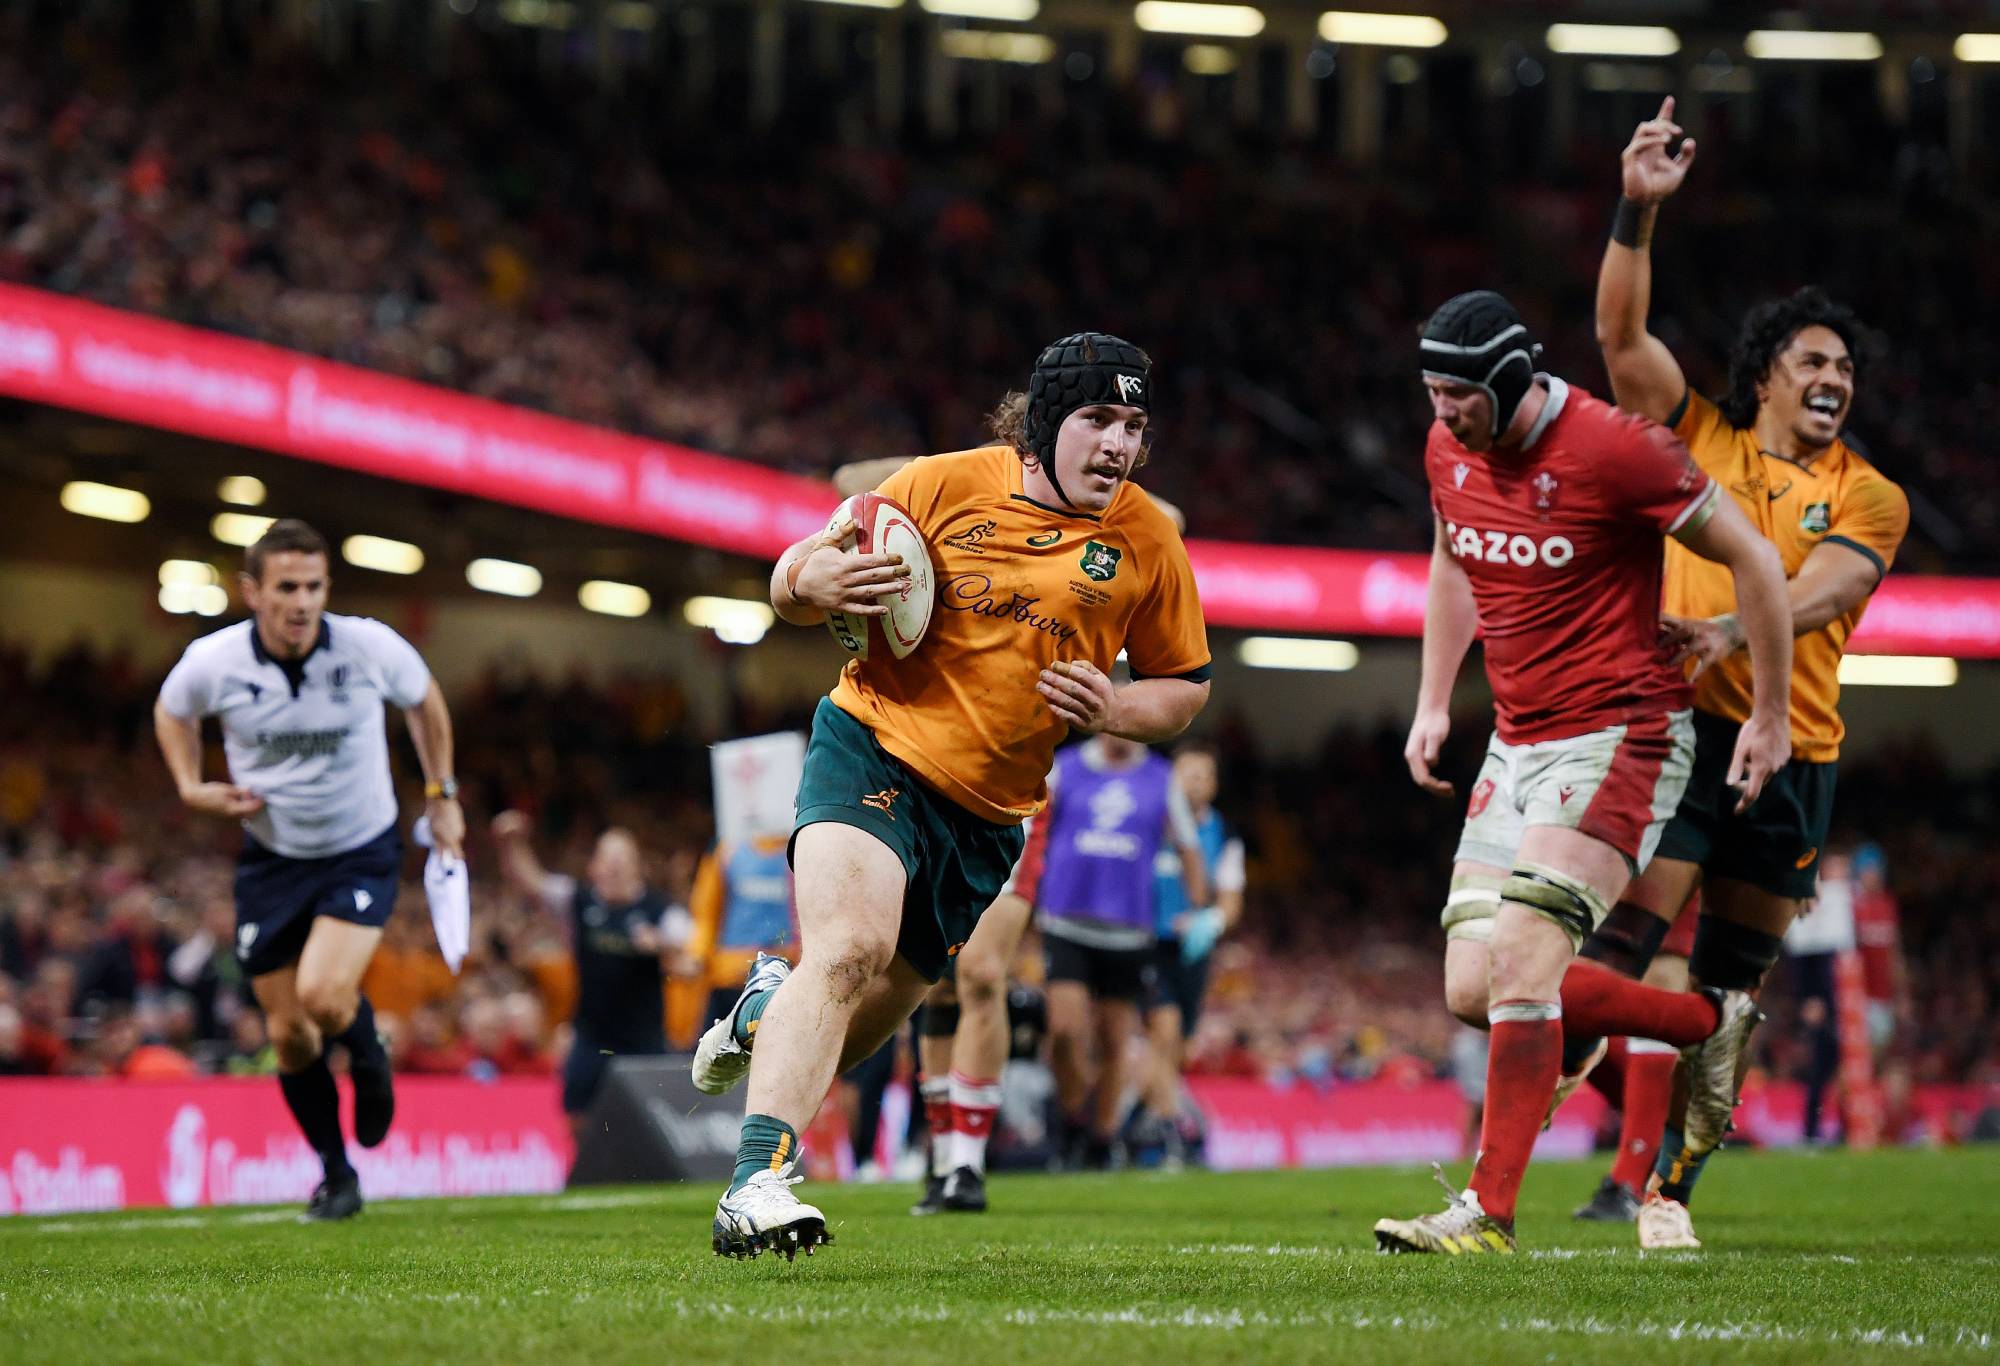 Lachlan Lonergan of Australia goes over to score their side's fourth try during the Autumn International match between Wales and Australia at Principality Stadium on November 26, 2022 in Cardiff, Wales. (Photo by Harry Trump/Getty Images)